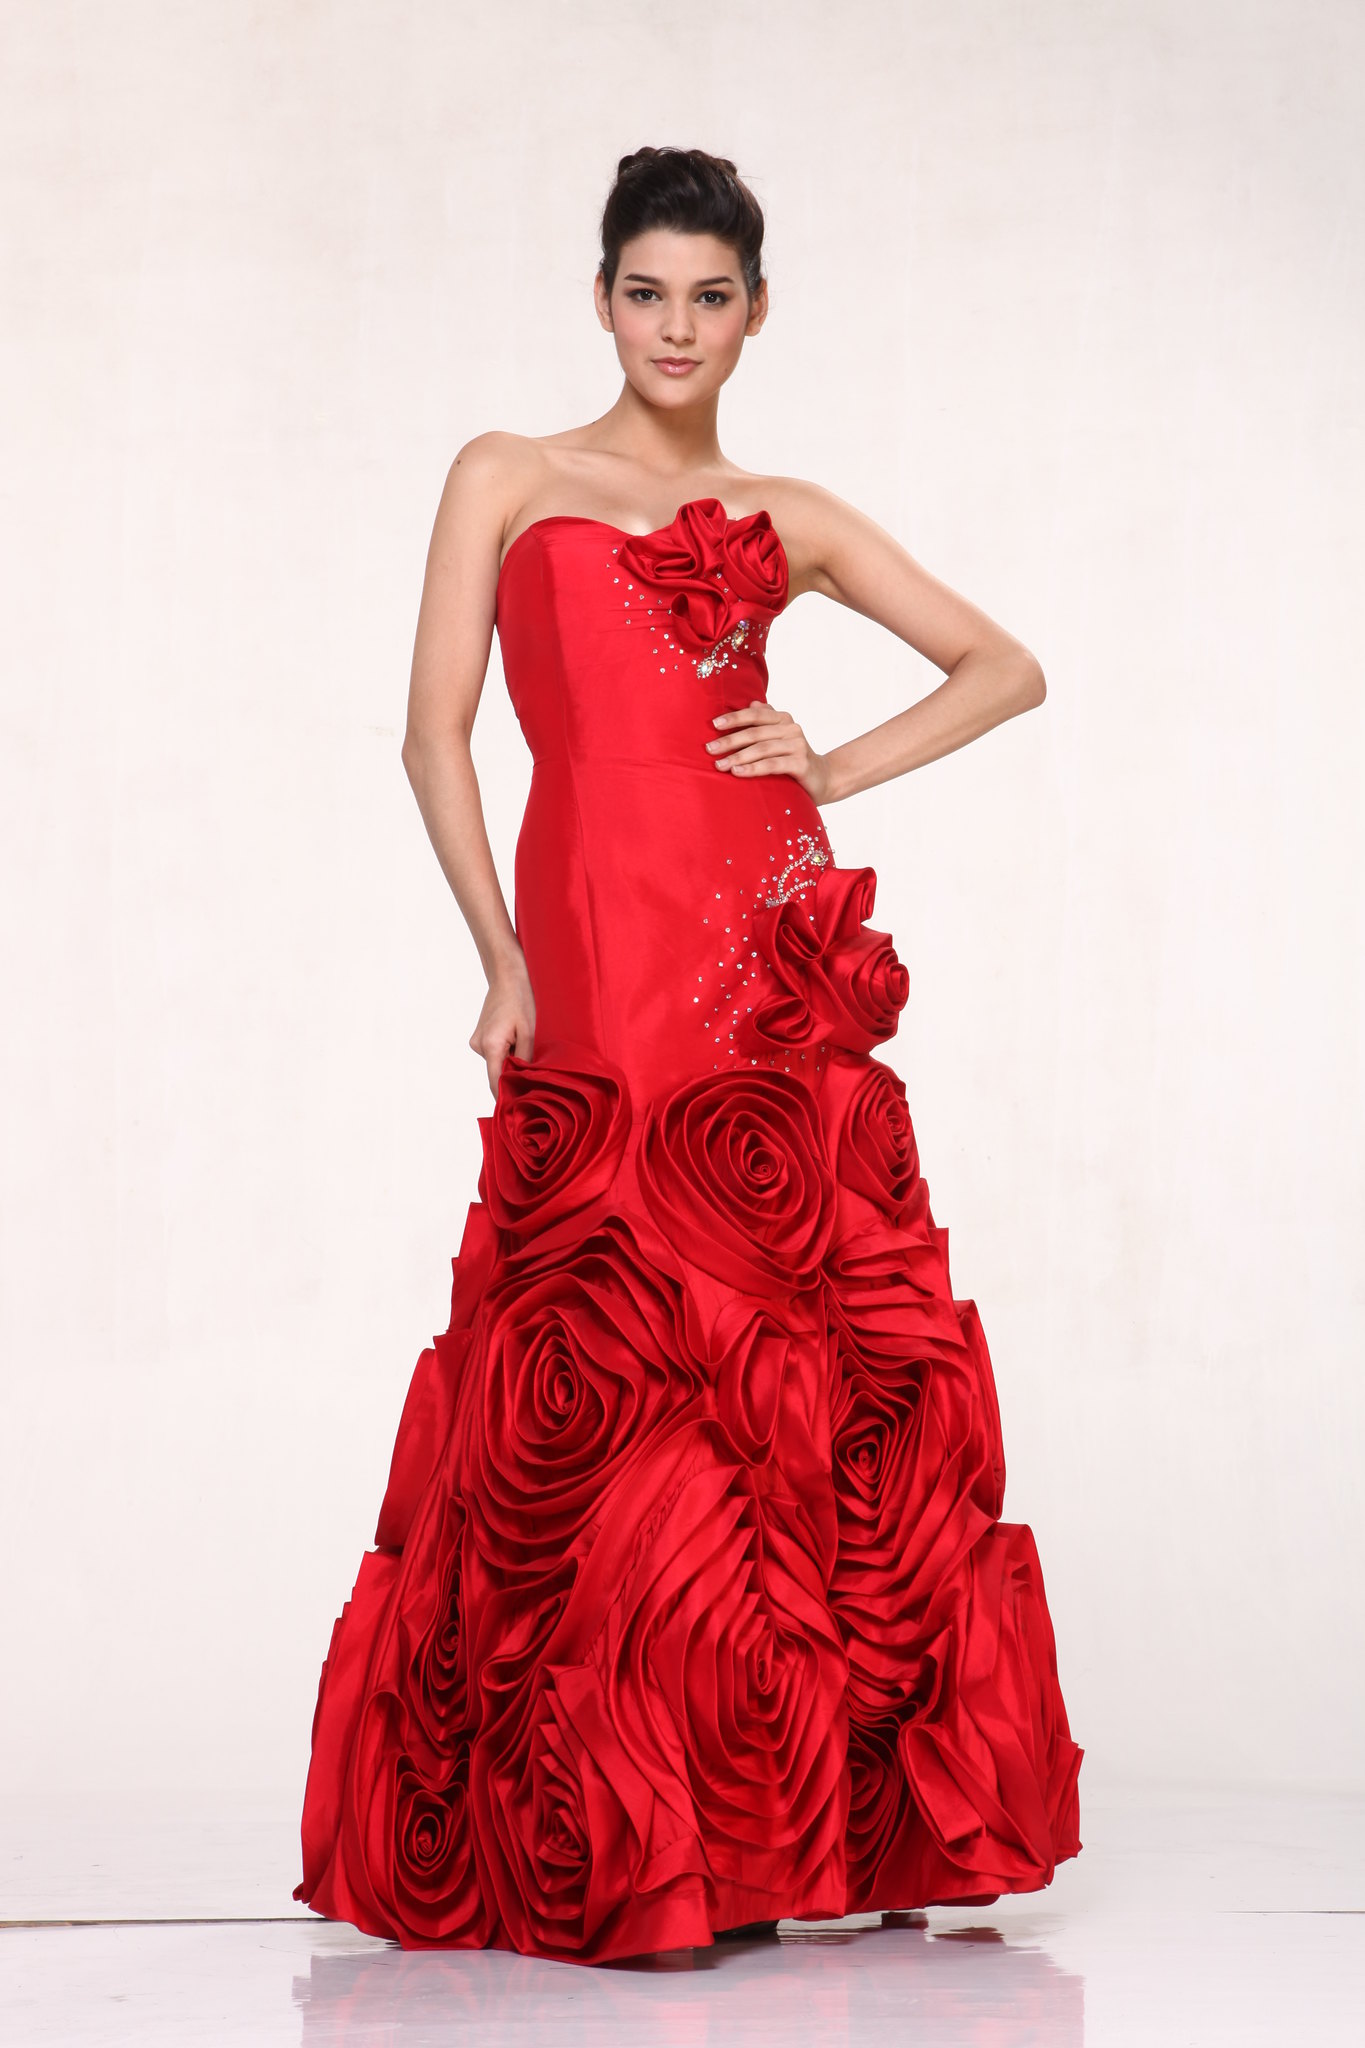 Homecoming Long Strapless Red Rose Formal Ball Gown Pageant Designer Prom Dress Ebay